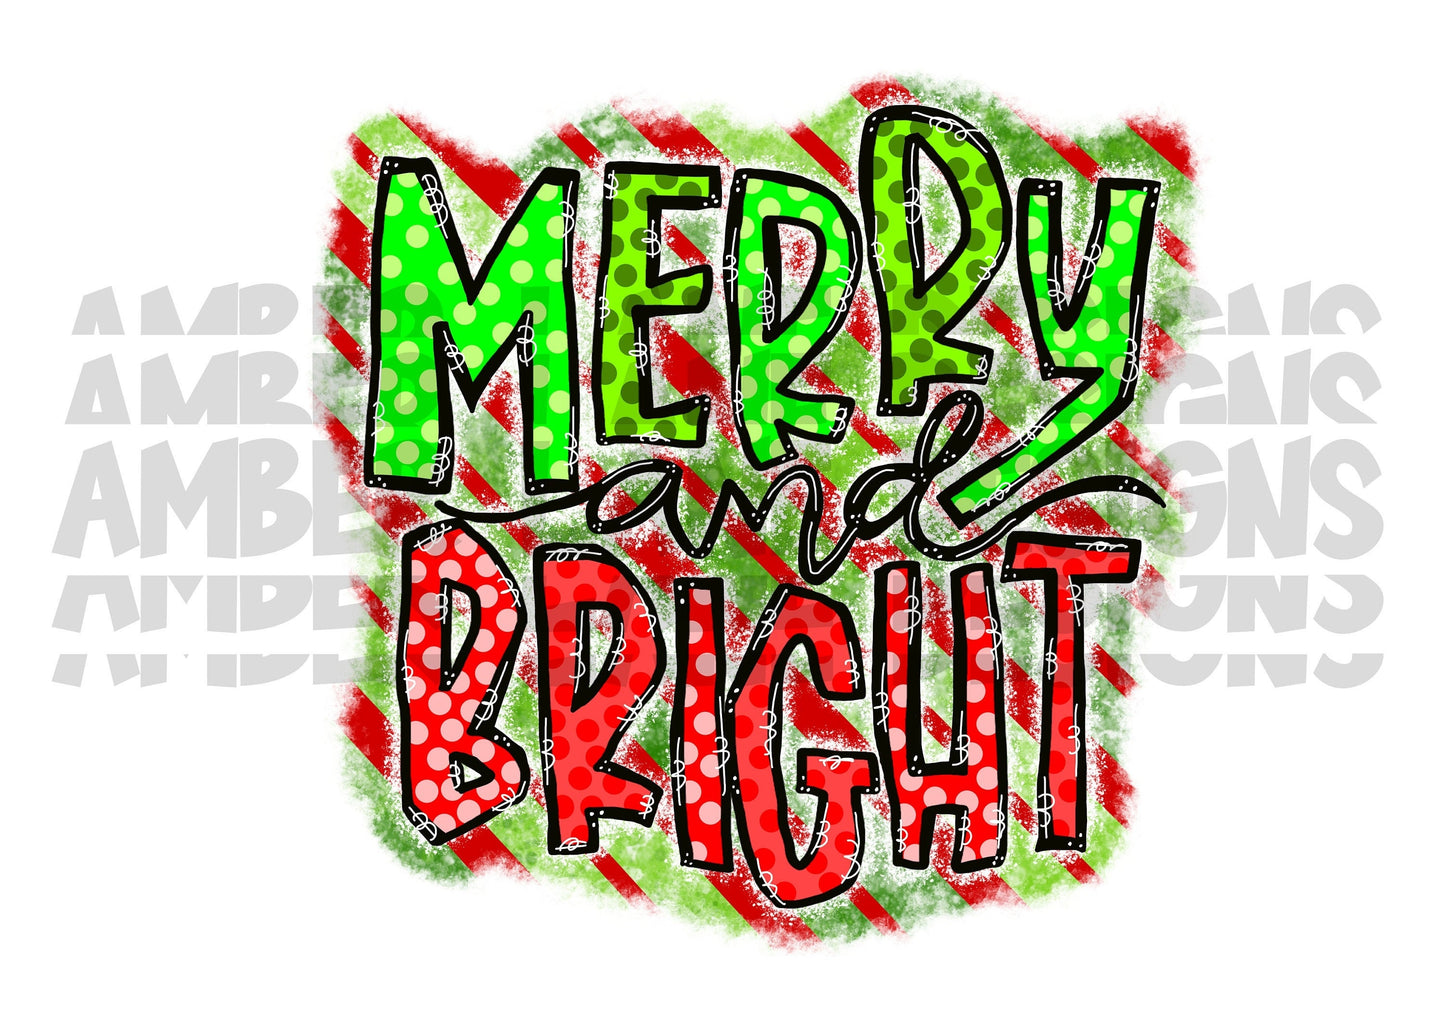 Merry Moments Marker: 'Merry and Bright' Hand-Lettered Joyful Typography